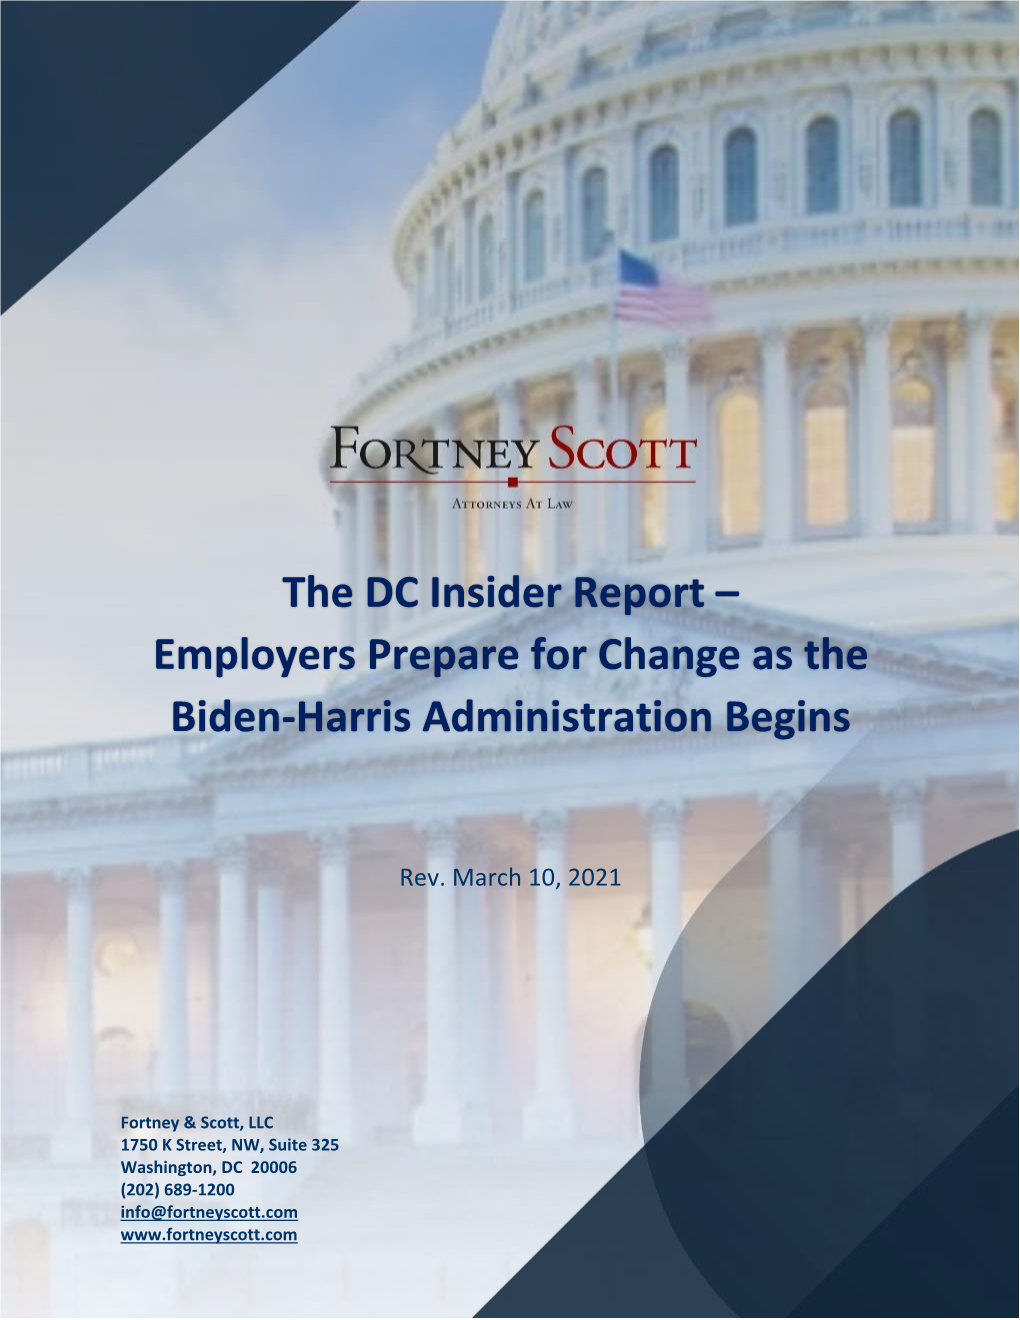 The DC Insider Report – Employers Prepare for Change As the Biden